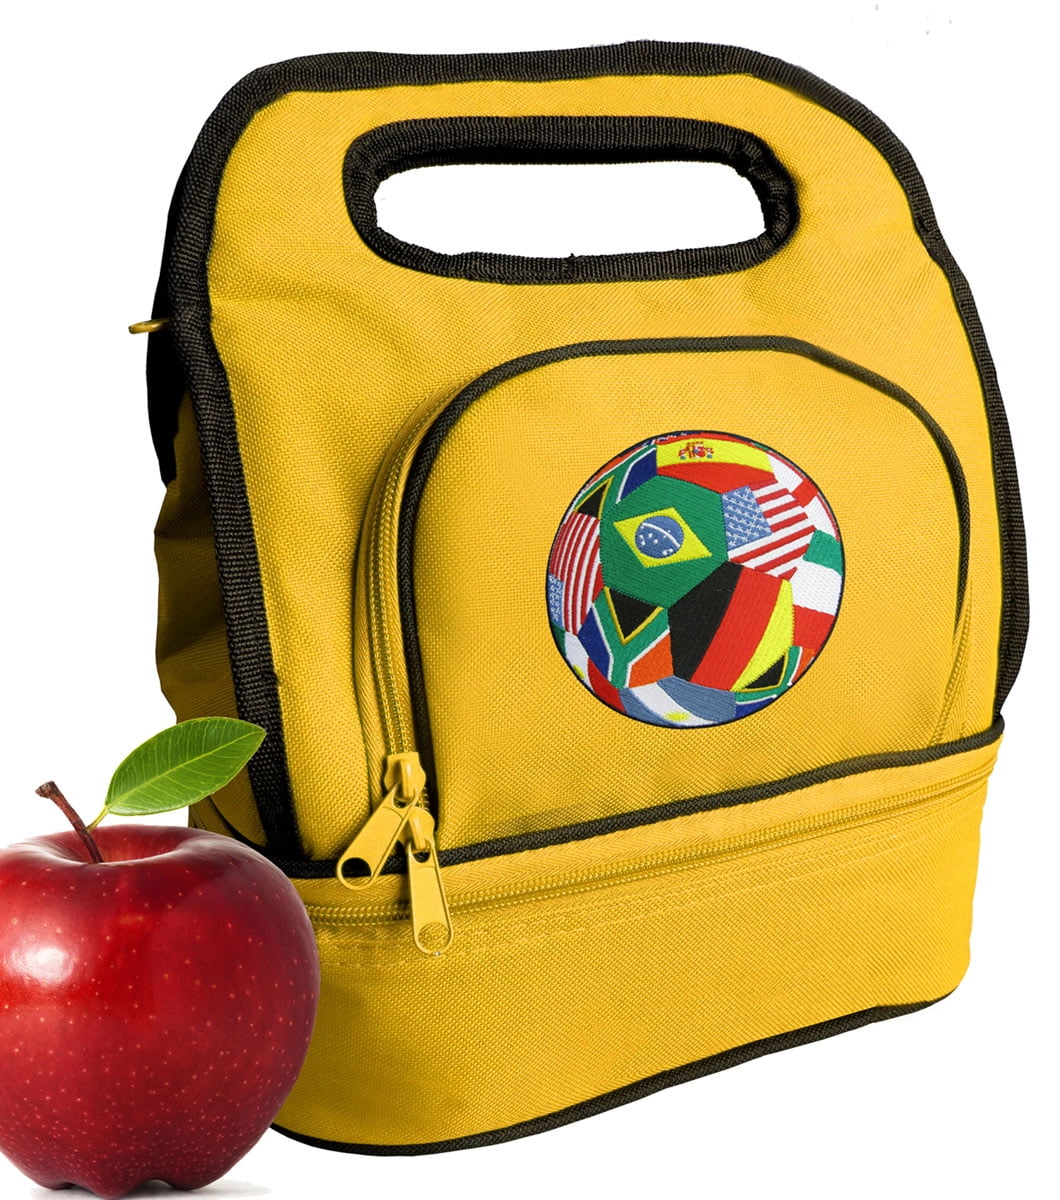 SOCCER Lunch Bag Cooler Insulated OUR BEST Lunchboxes WORLD CUP FAN SOCCER BAG 